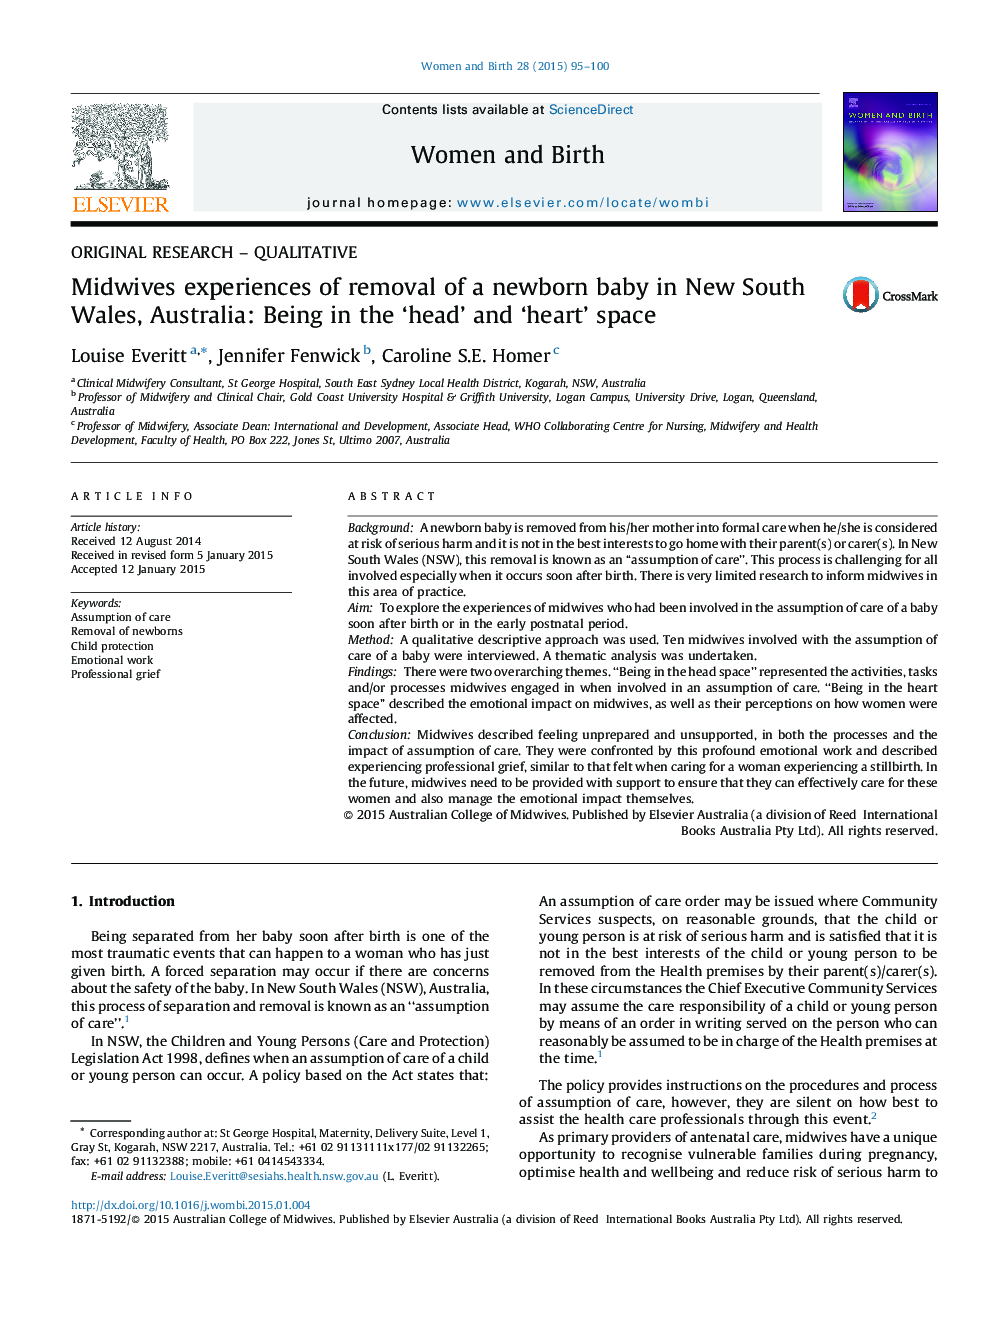 Midwives experiences of removal of a newborn baby in New South Wales, Australia: Being in the 'head' and 'heart' space